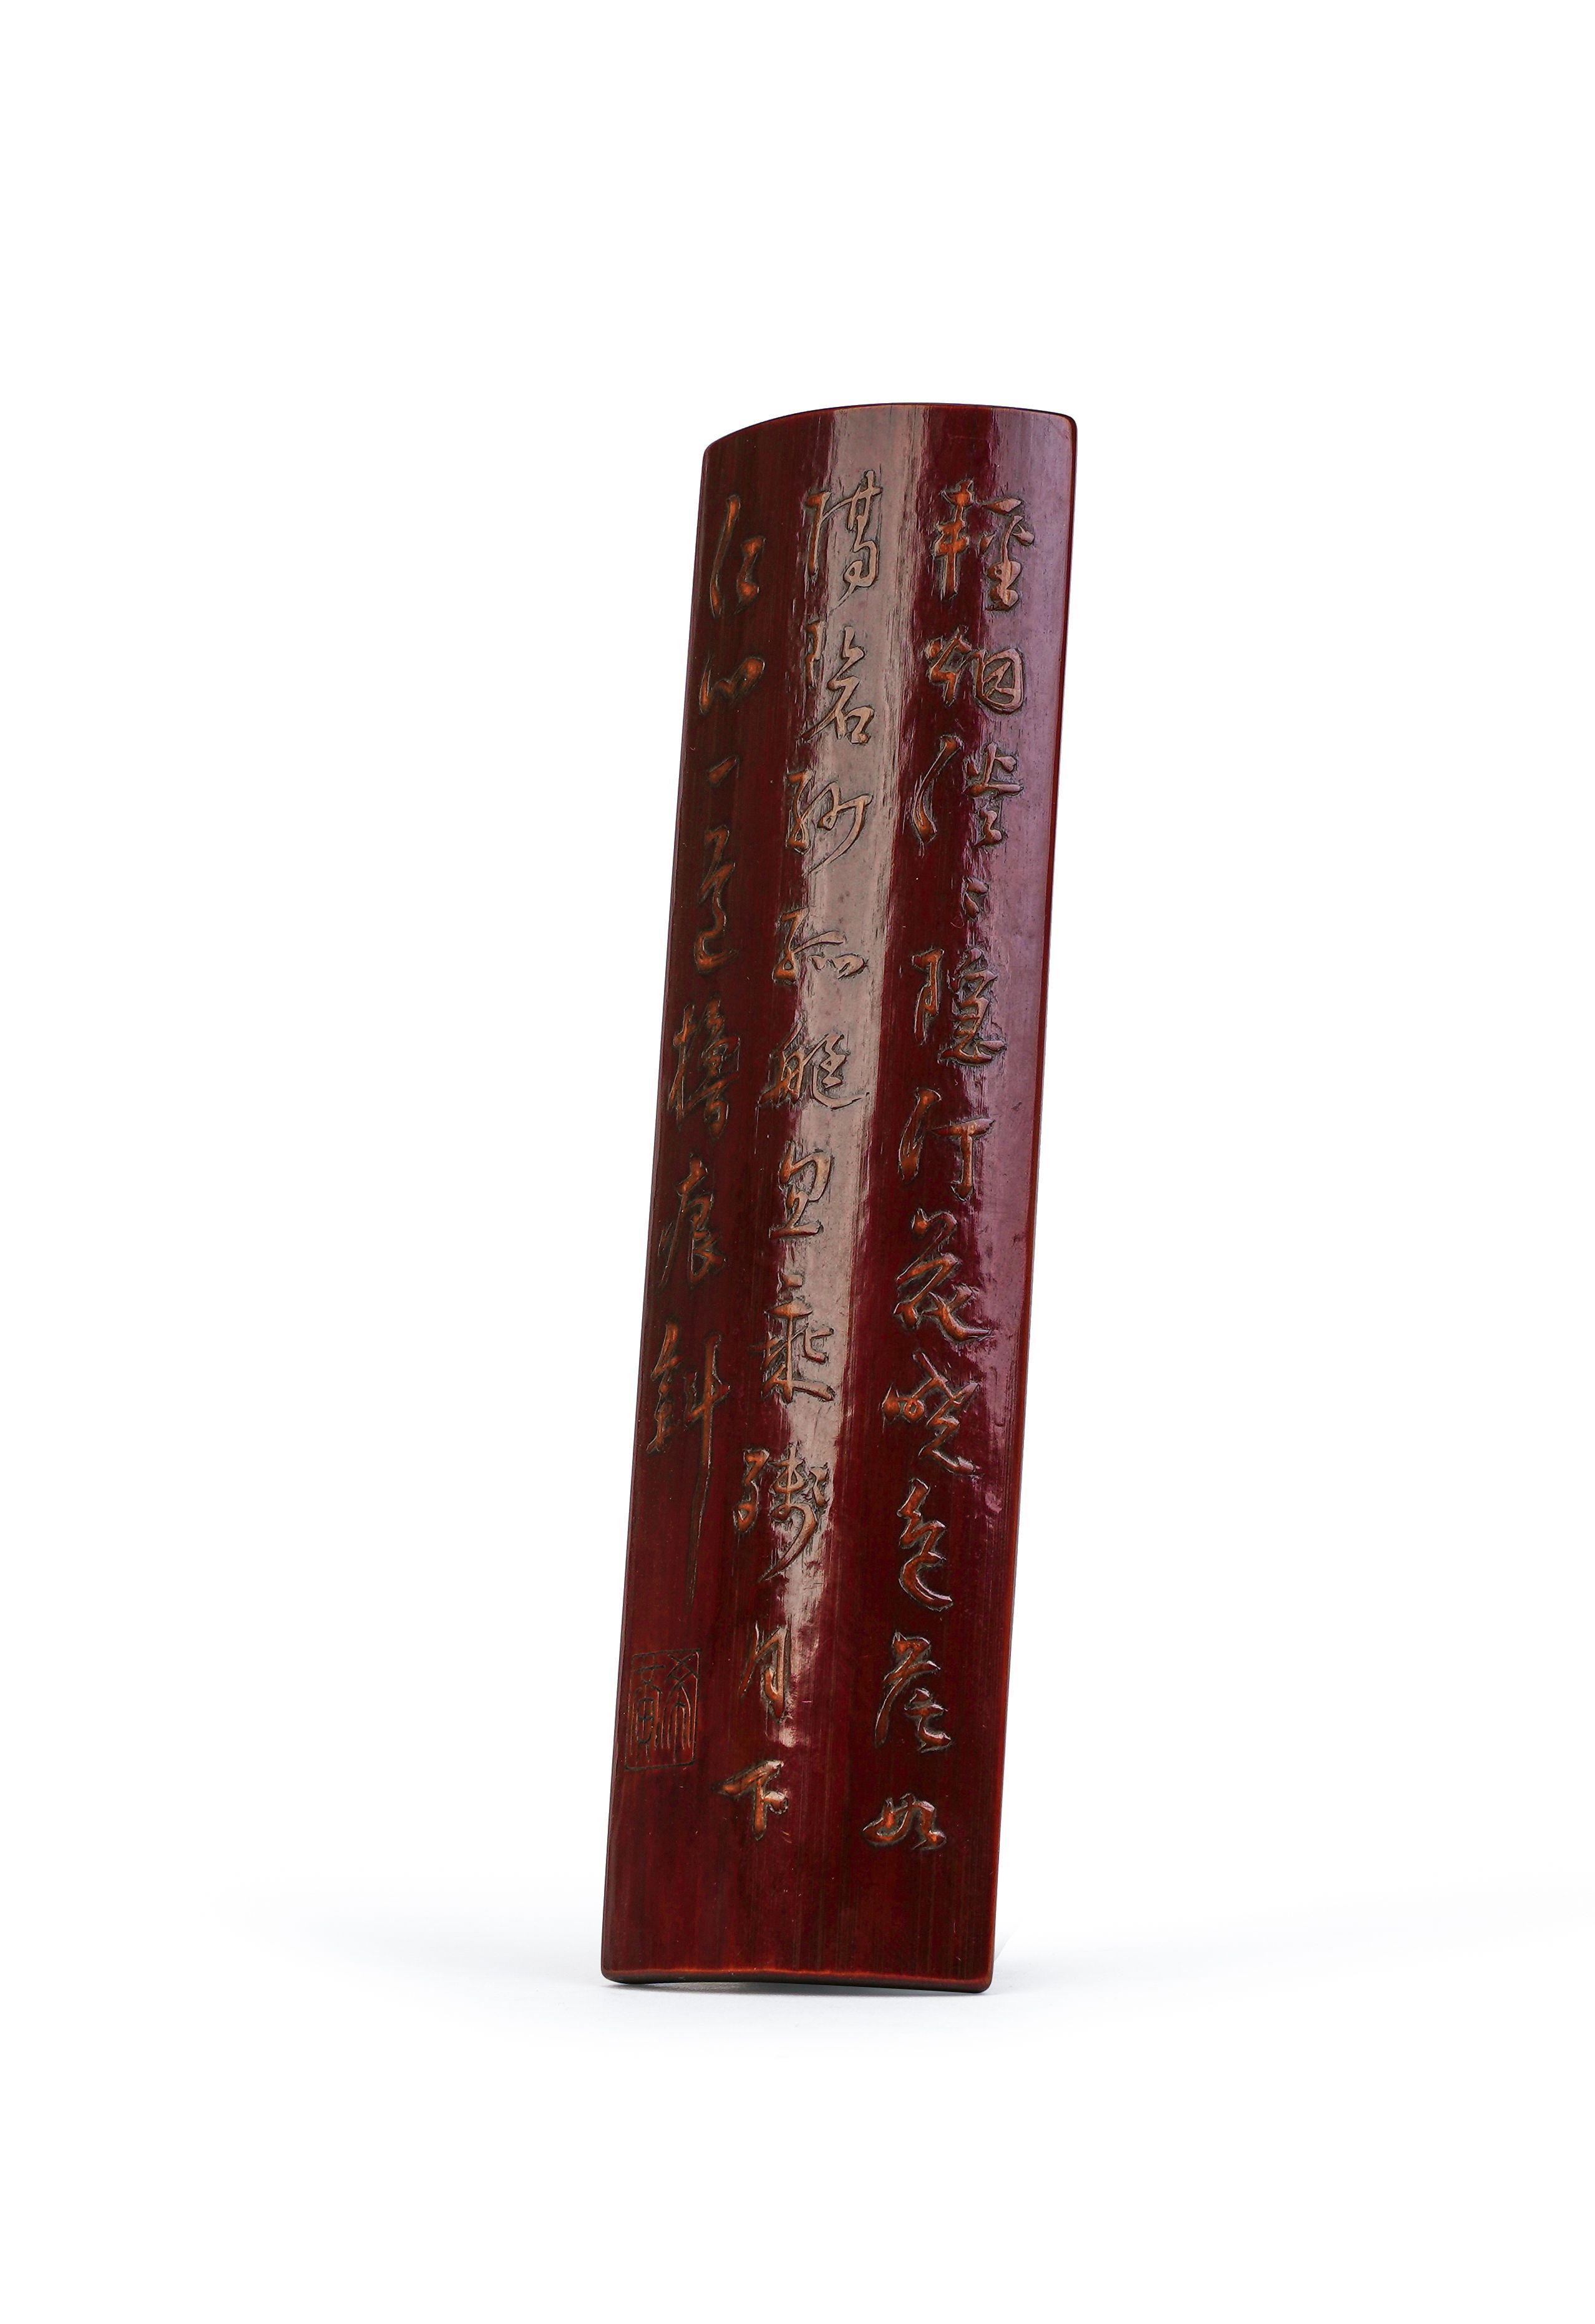 AN INSCRIBED CHINESE BAMBOO BRUSH REST, 17TH CENTURY, KANGXI PERIOD (1662-1722) - Image 9 of 11